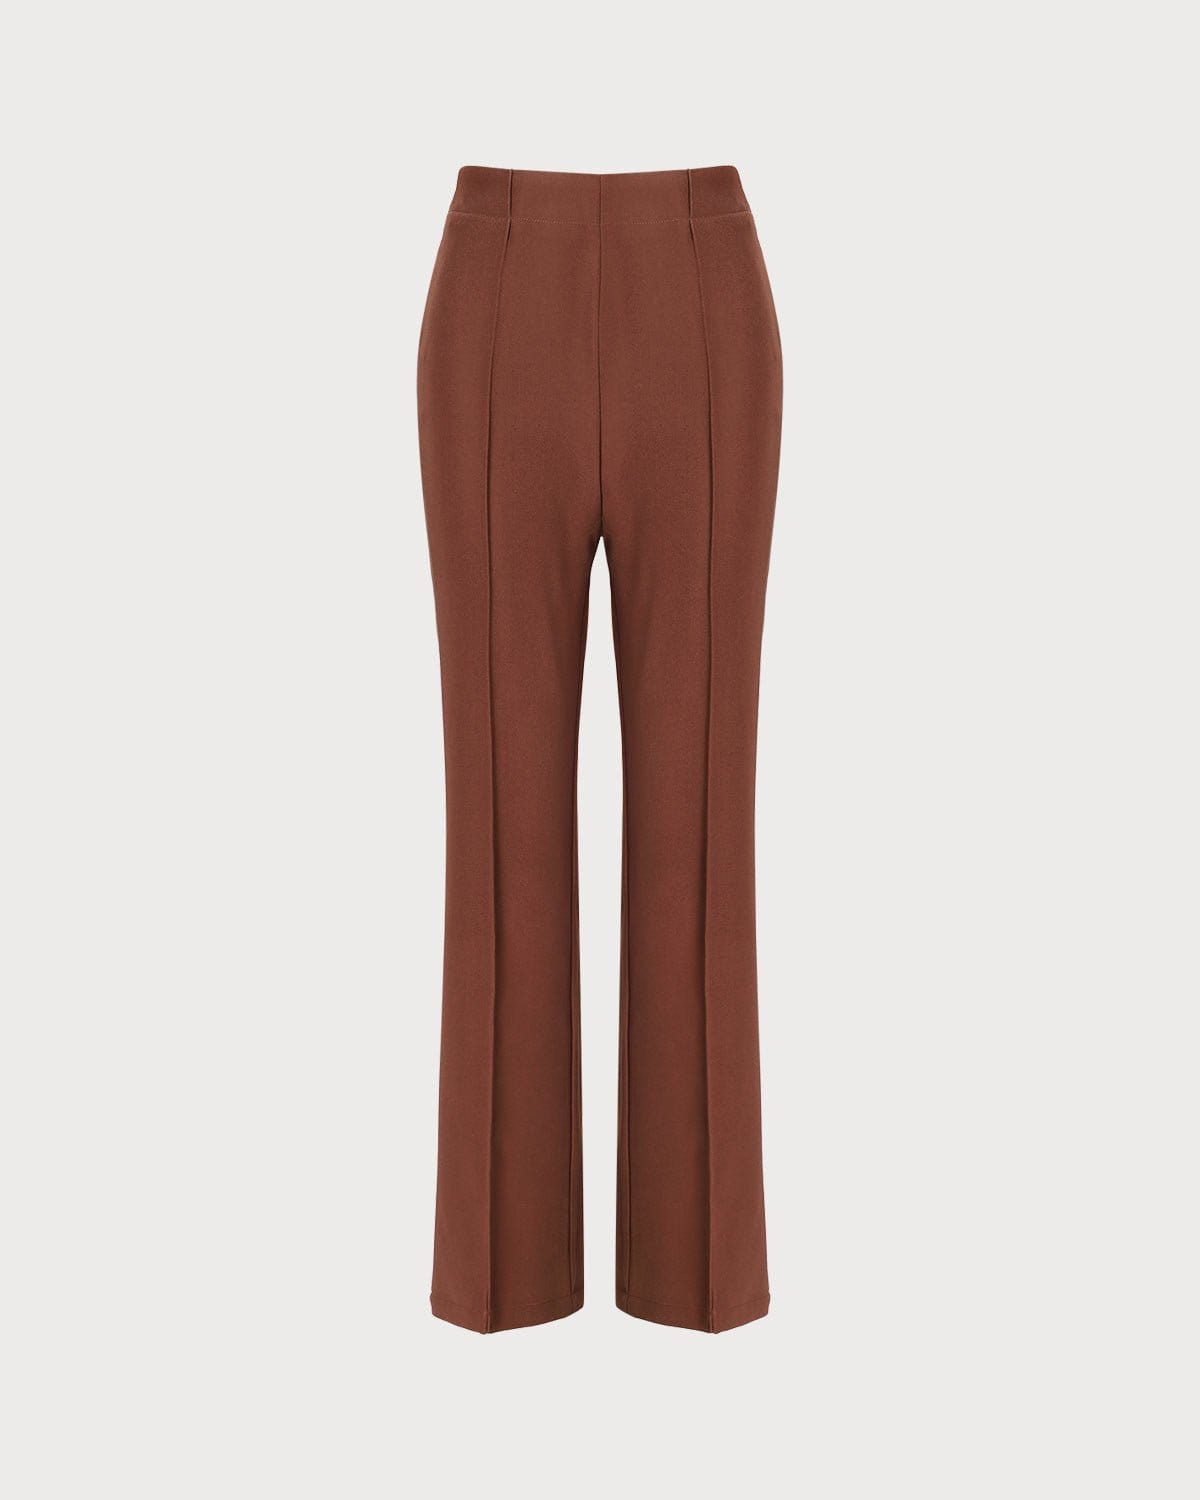 The Brick Red High Waisted Pleated Flare Pants - Women's High Waisted  Pleated Flare Pants - Brick Red - Bottoms